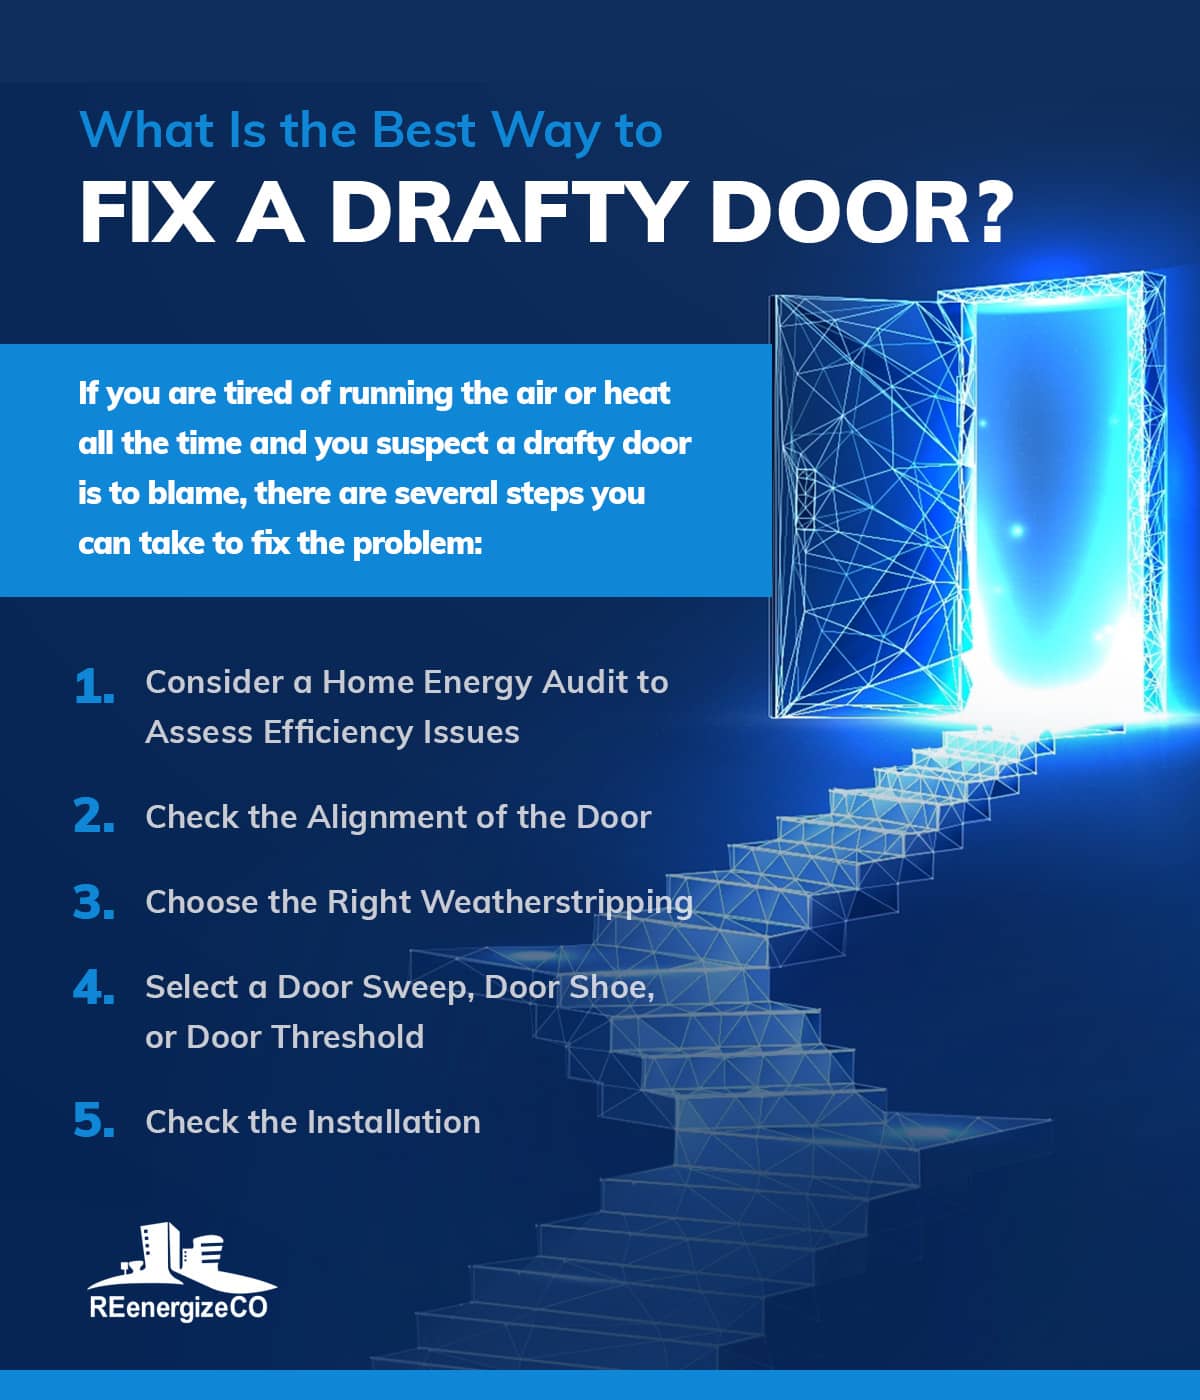 What is the best way to fix a drafty door? | REenergizeCO